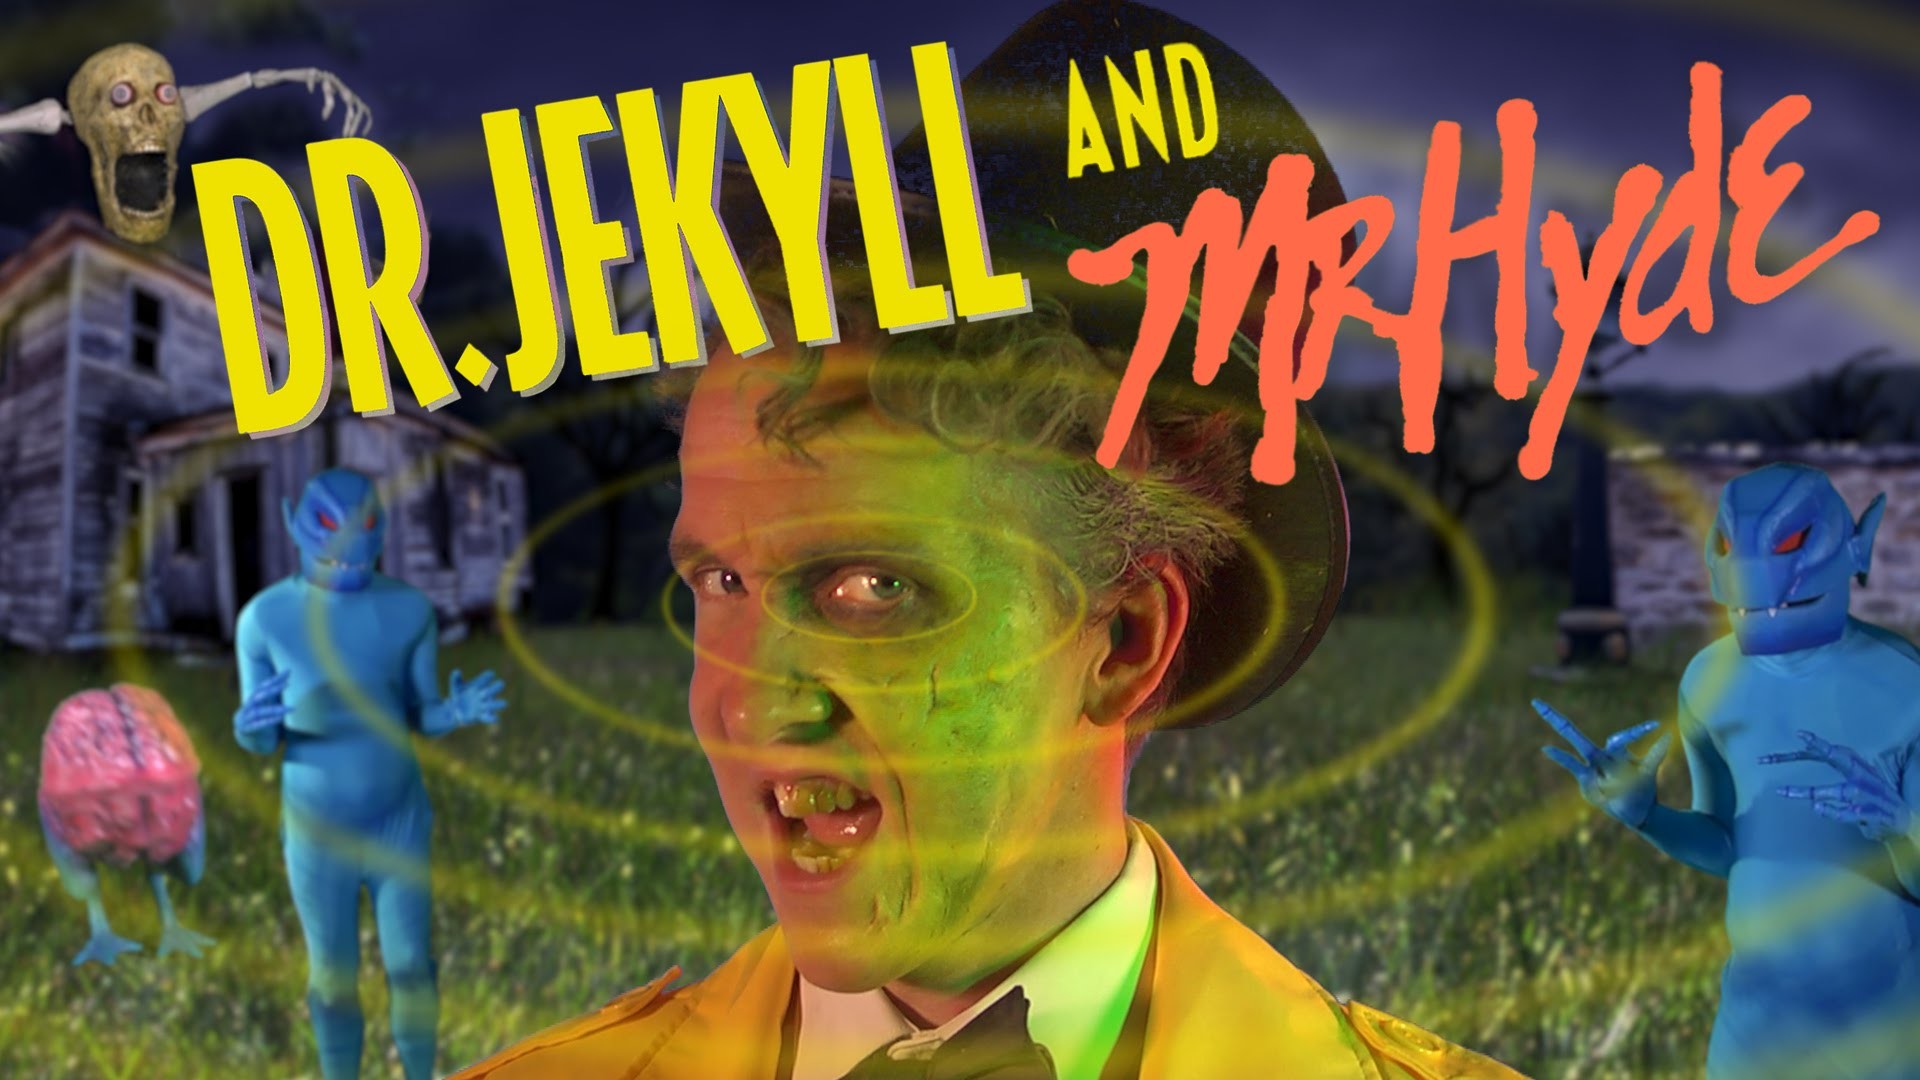 1920x1080 Dr. Jekyll and Mr. Hyde: The Game - The Movie (2015)